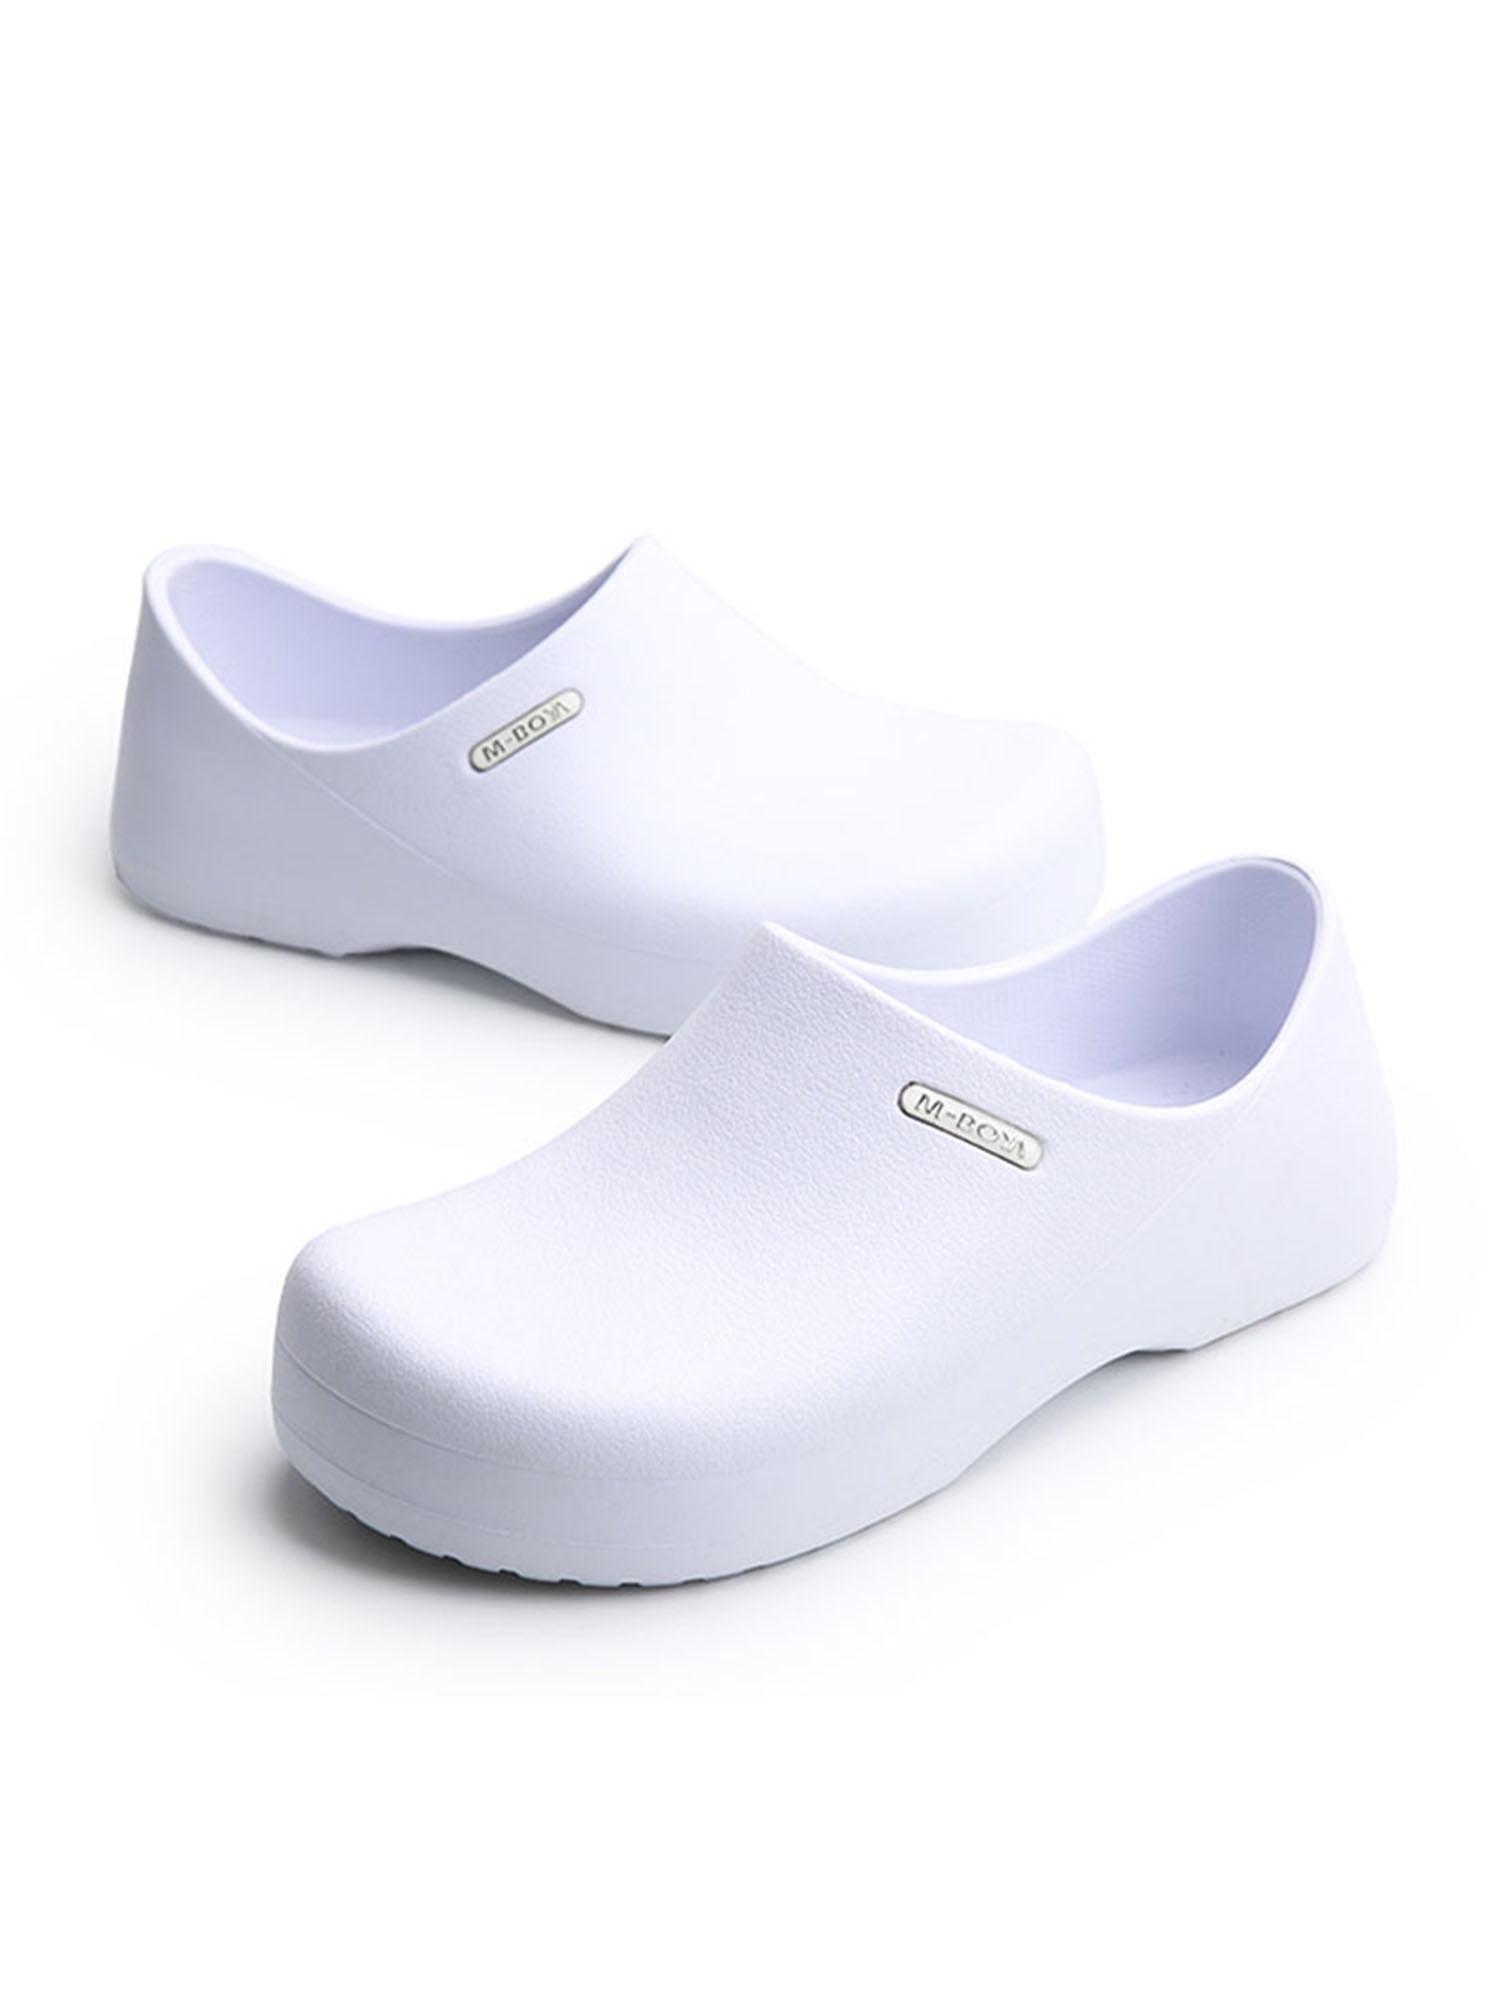 Hospitality shoes ideal for restaurant table service - Comfortable shoes  for walking long hours | Uniform Shoes